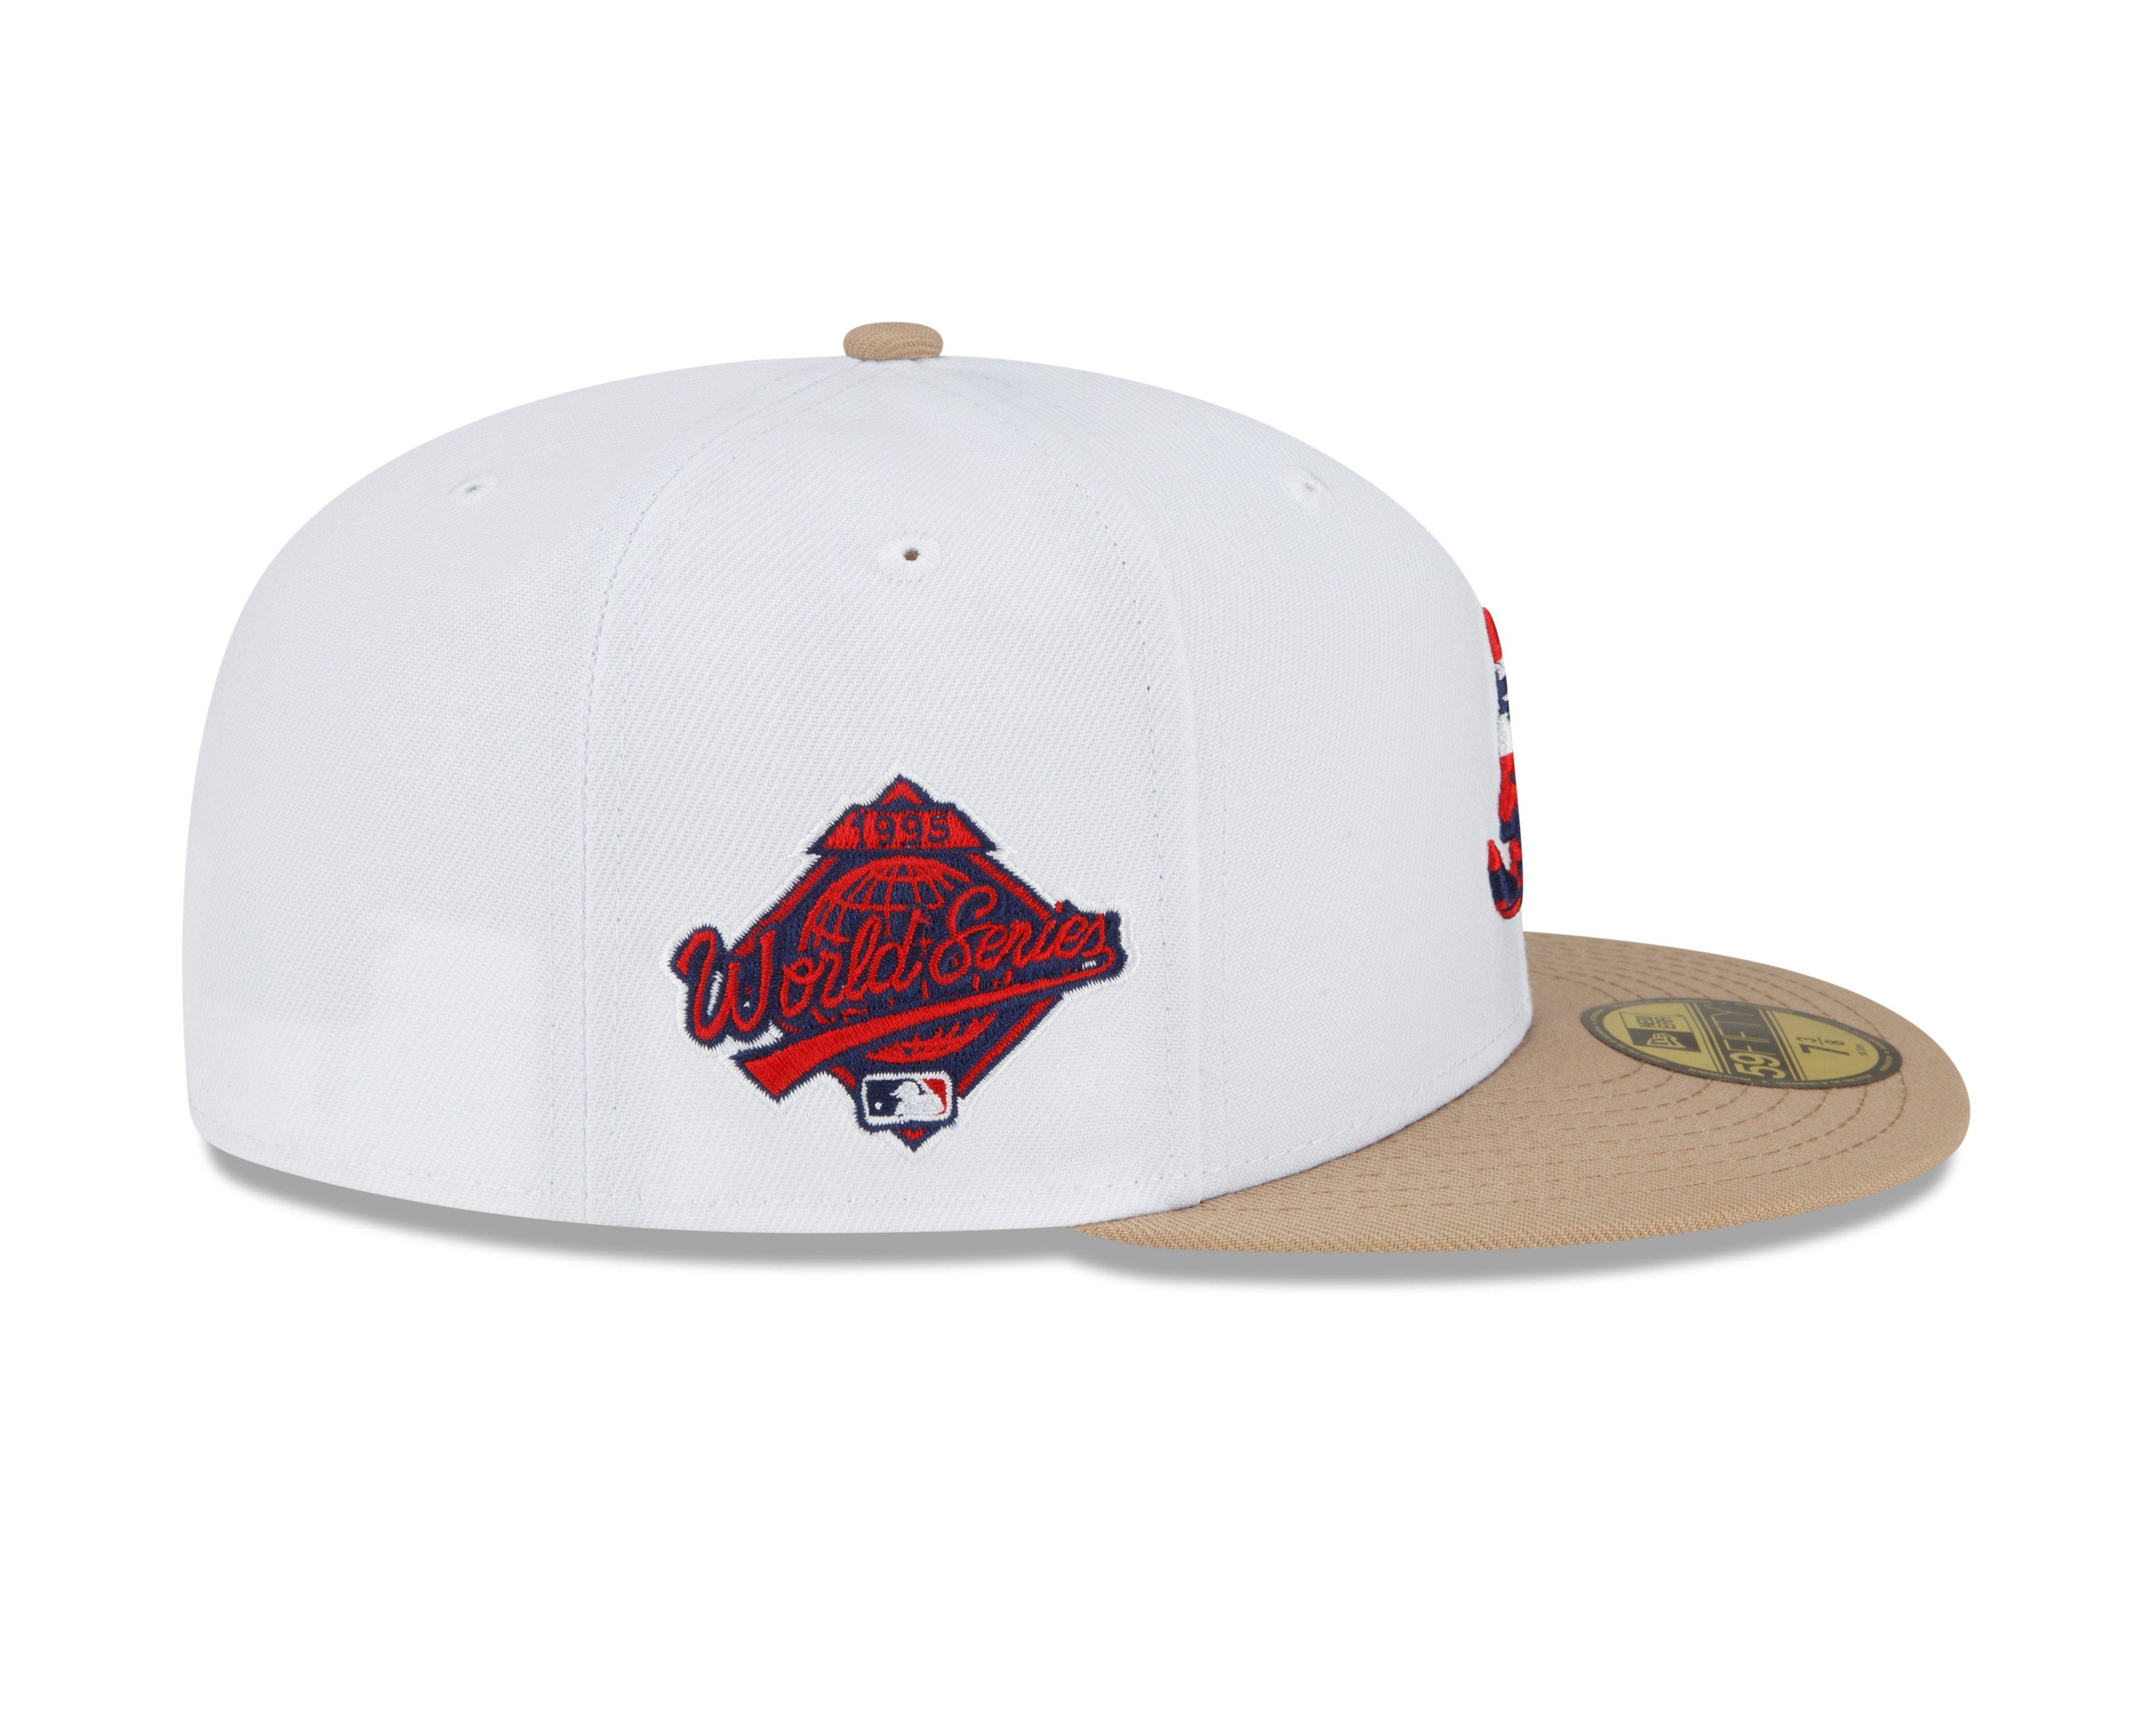 Men's New Era Atlanta Braves Retro Crown Classic 59FIFTY Fitted